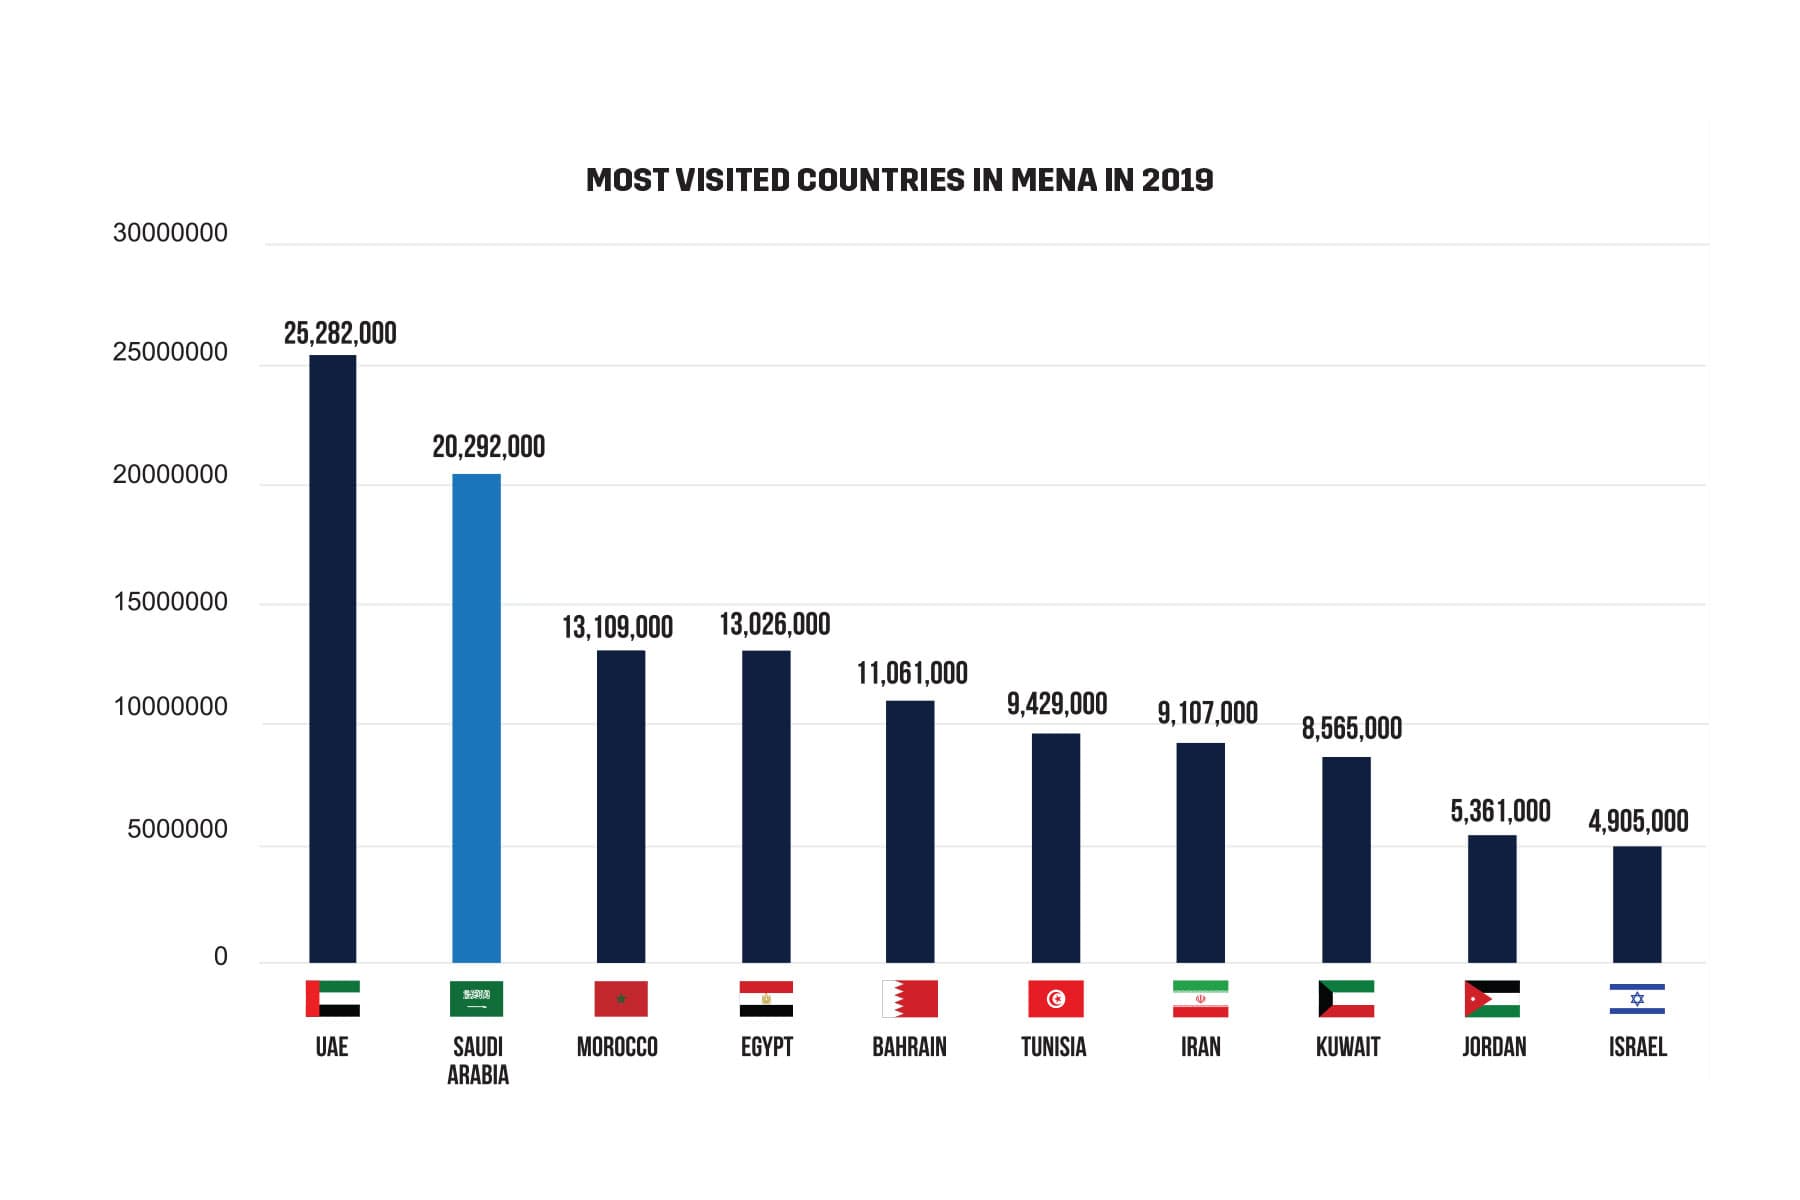 Most visited countries in MENA in 2019